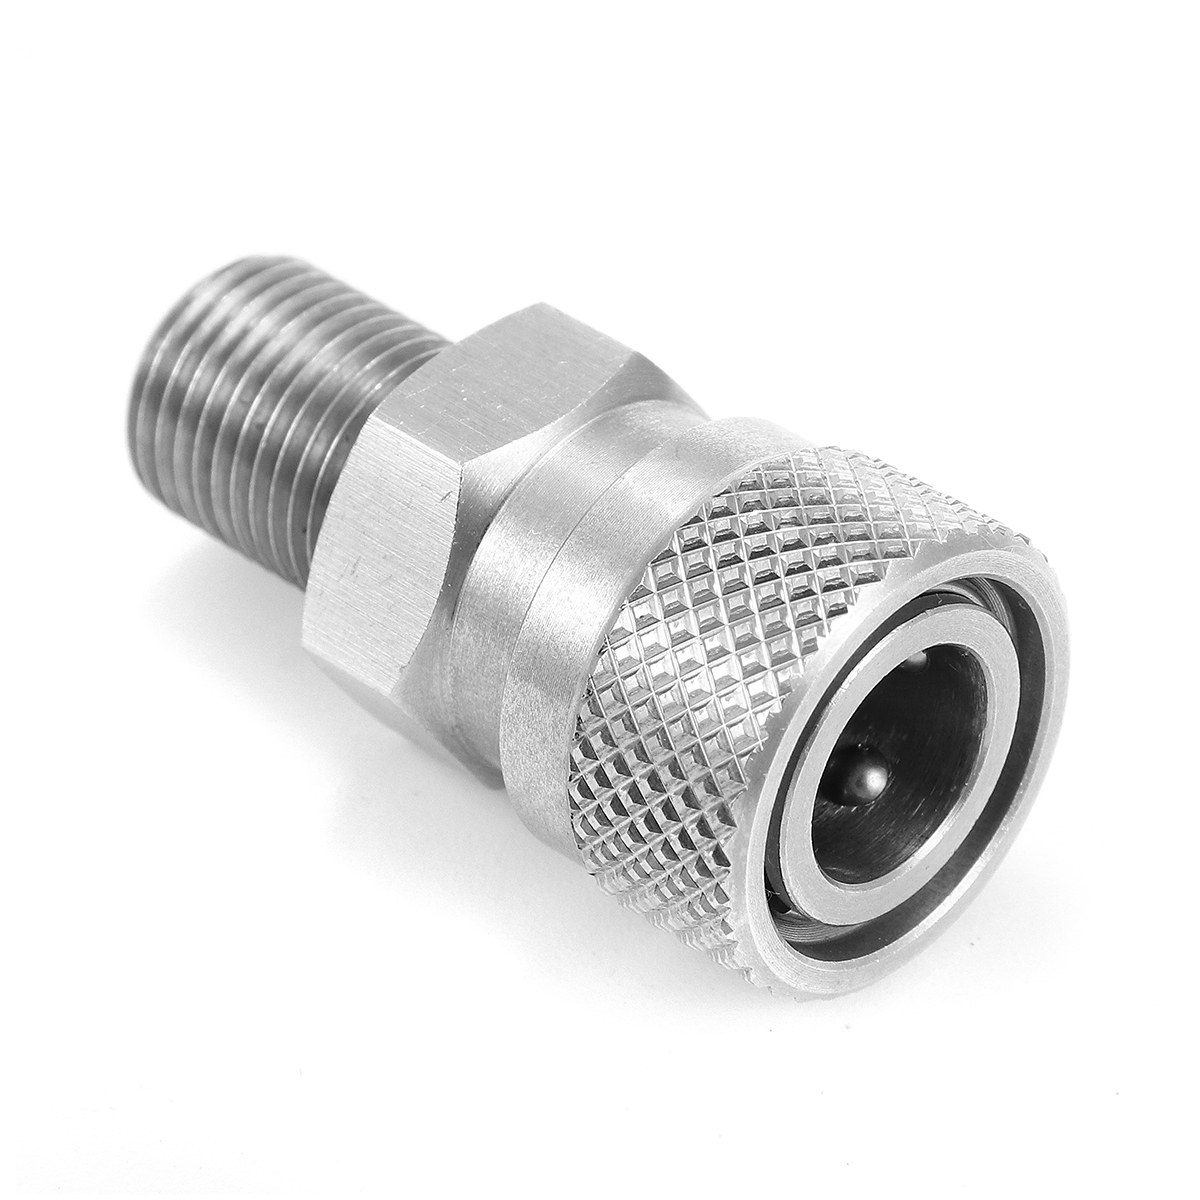 18-inch-BSP-Stainless-Steel-Male-Plug-Quick-Head-Connector-PCP-Release-Disconnect-Coupler-Socket-1309148